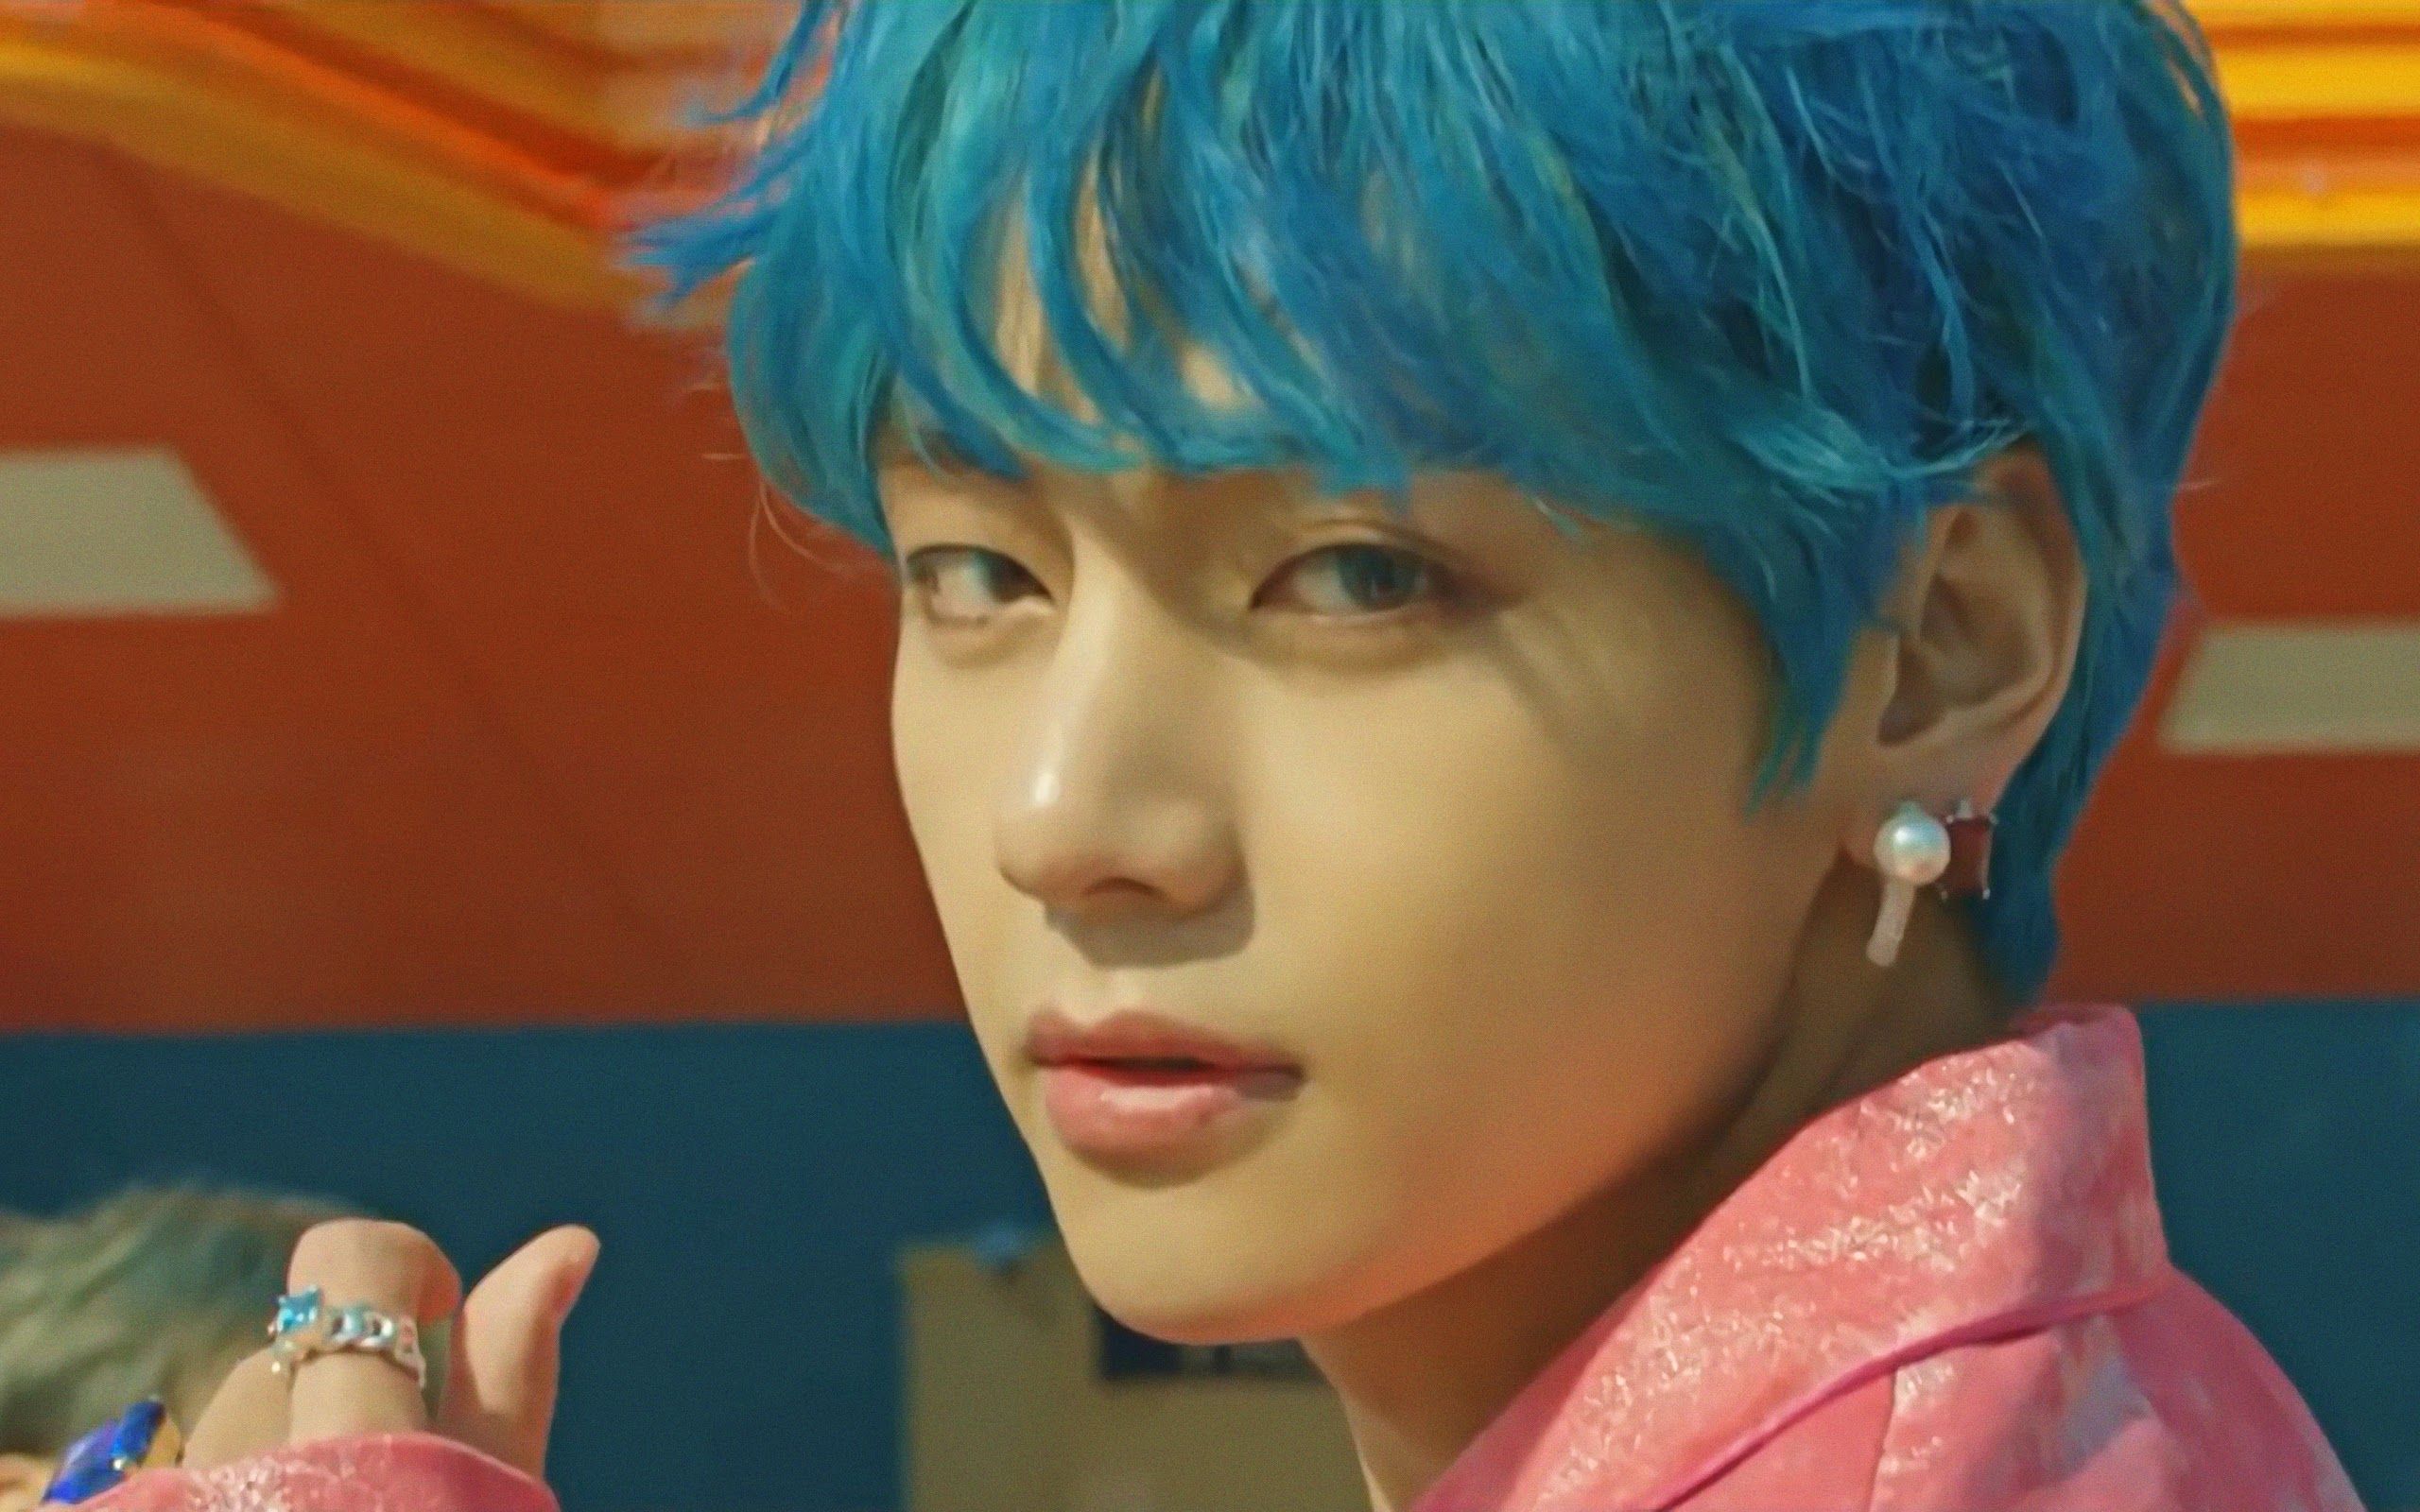 BTS Jungkook with blue hair - wide 10